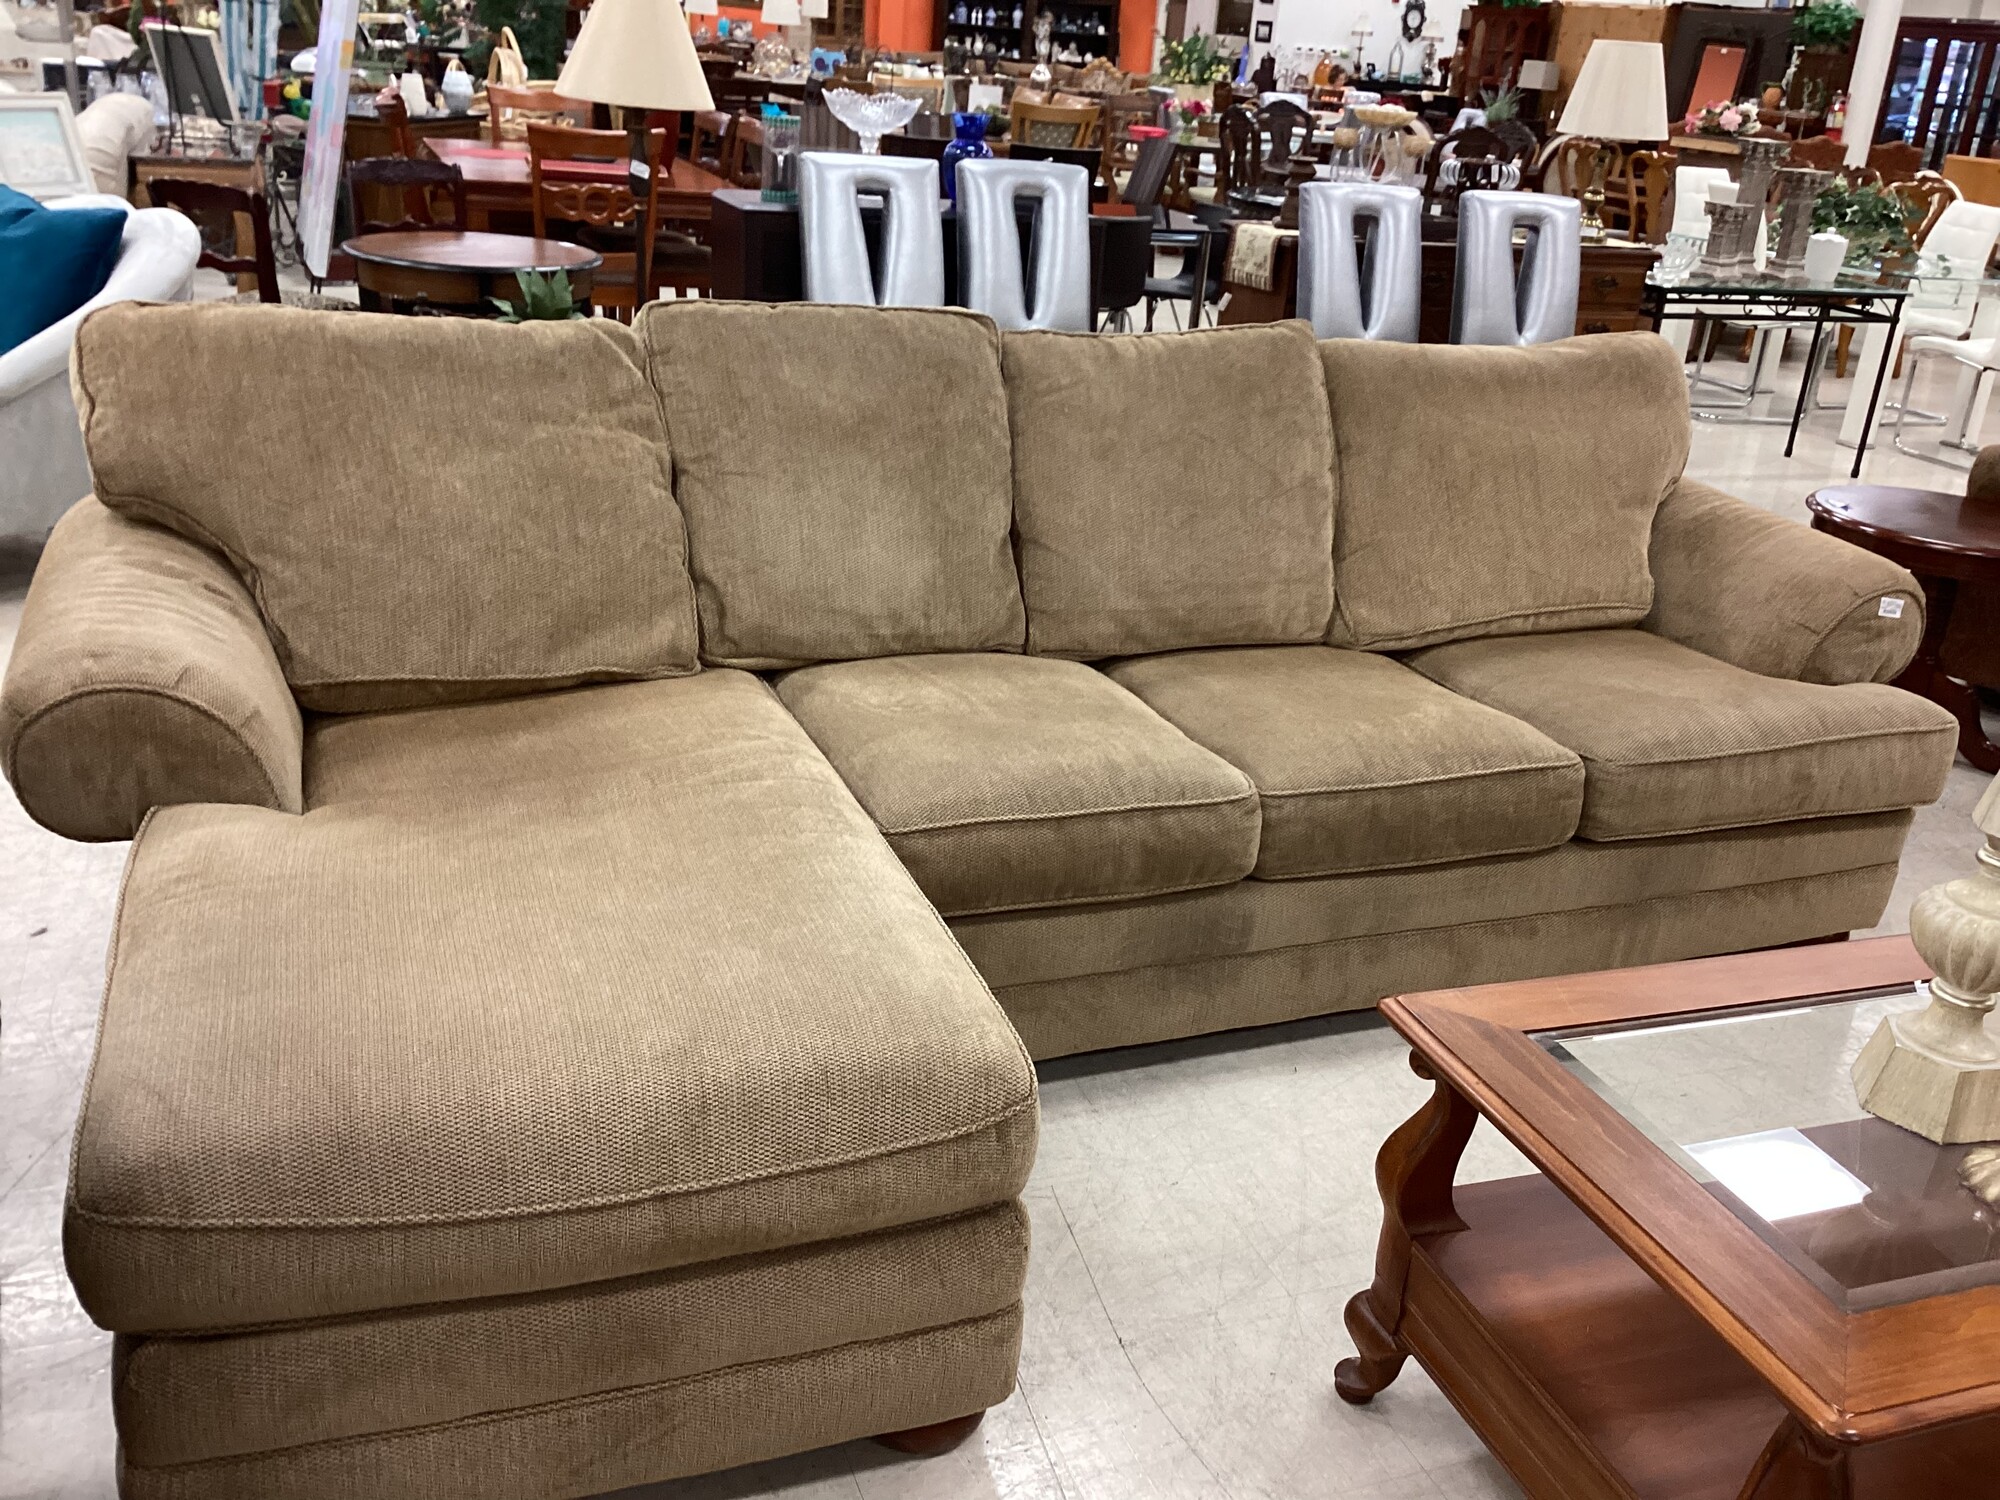 Bassett 2pc Sectional, Camel, 2 Pieces
119 In W